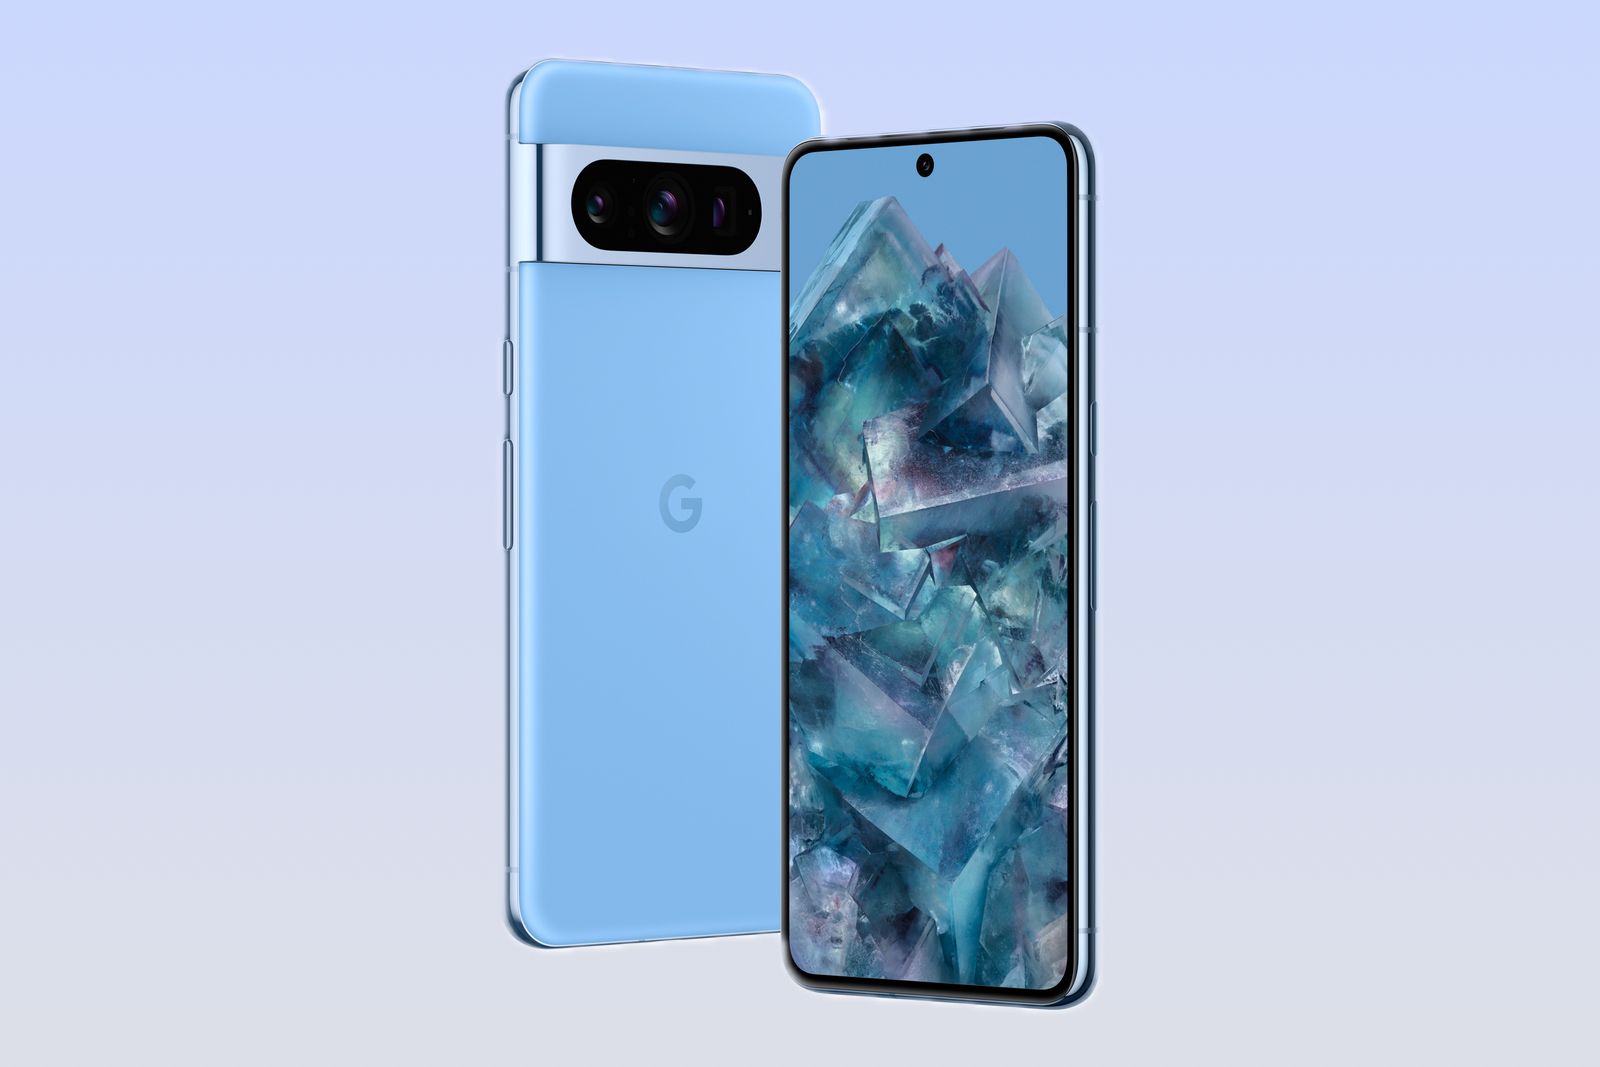 Google announces Pixel 5 with wide-angle lens, 8GB RAM - 9to5Google